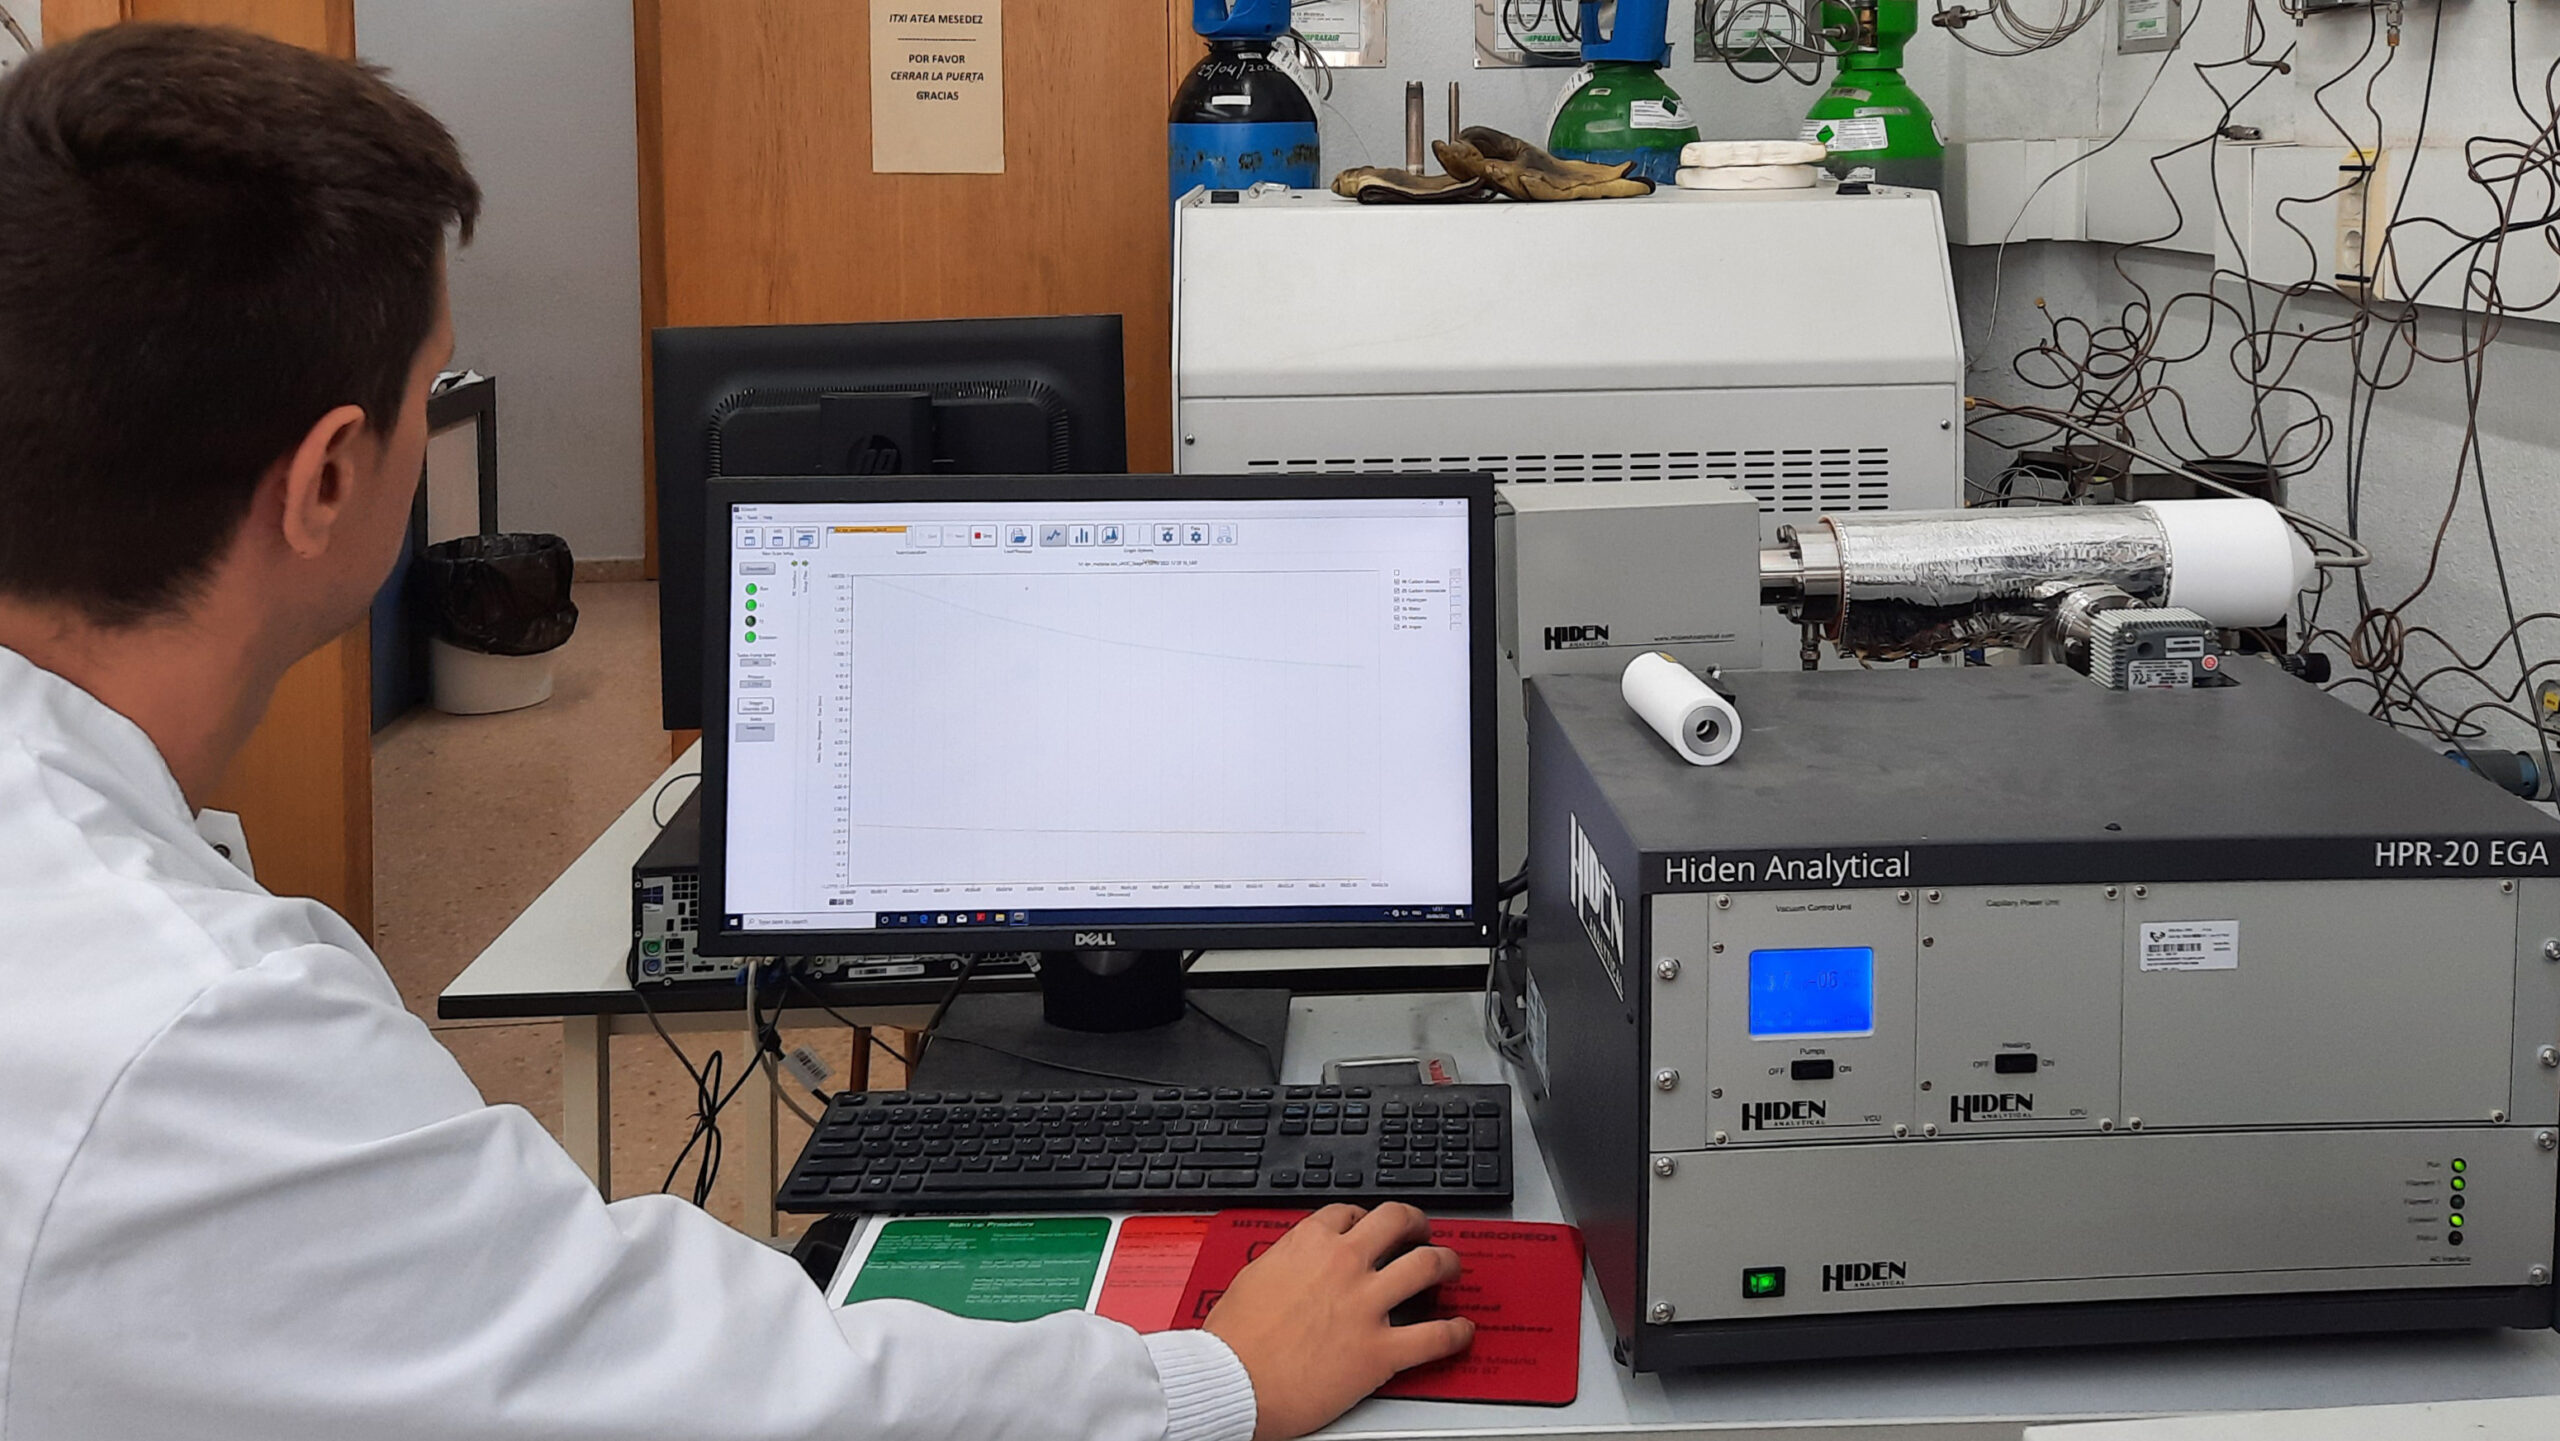 The Hiden Analytical HPR-20 EGA Mass Spectrometer in the Laboratory